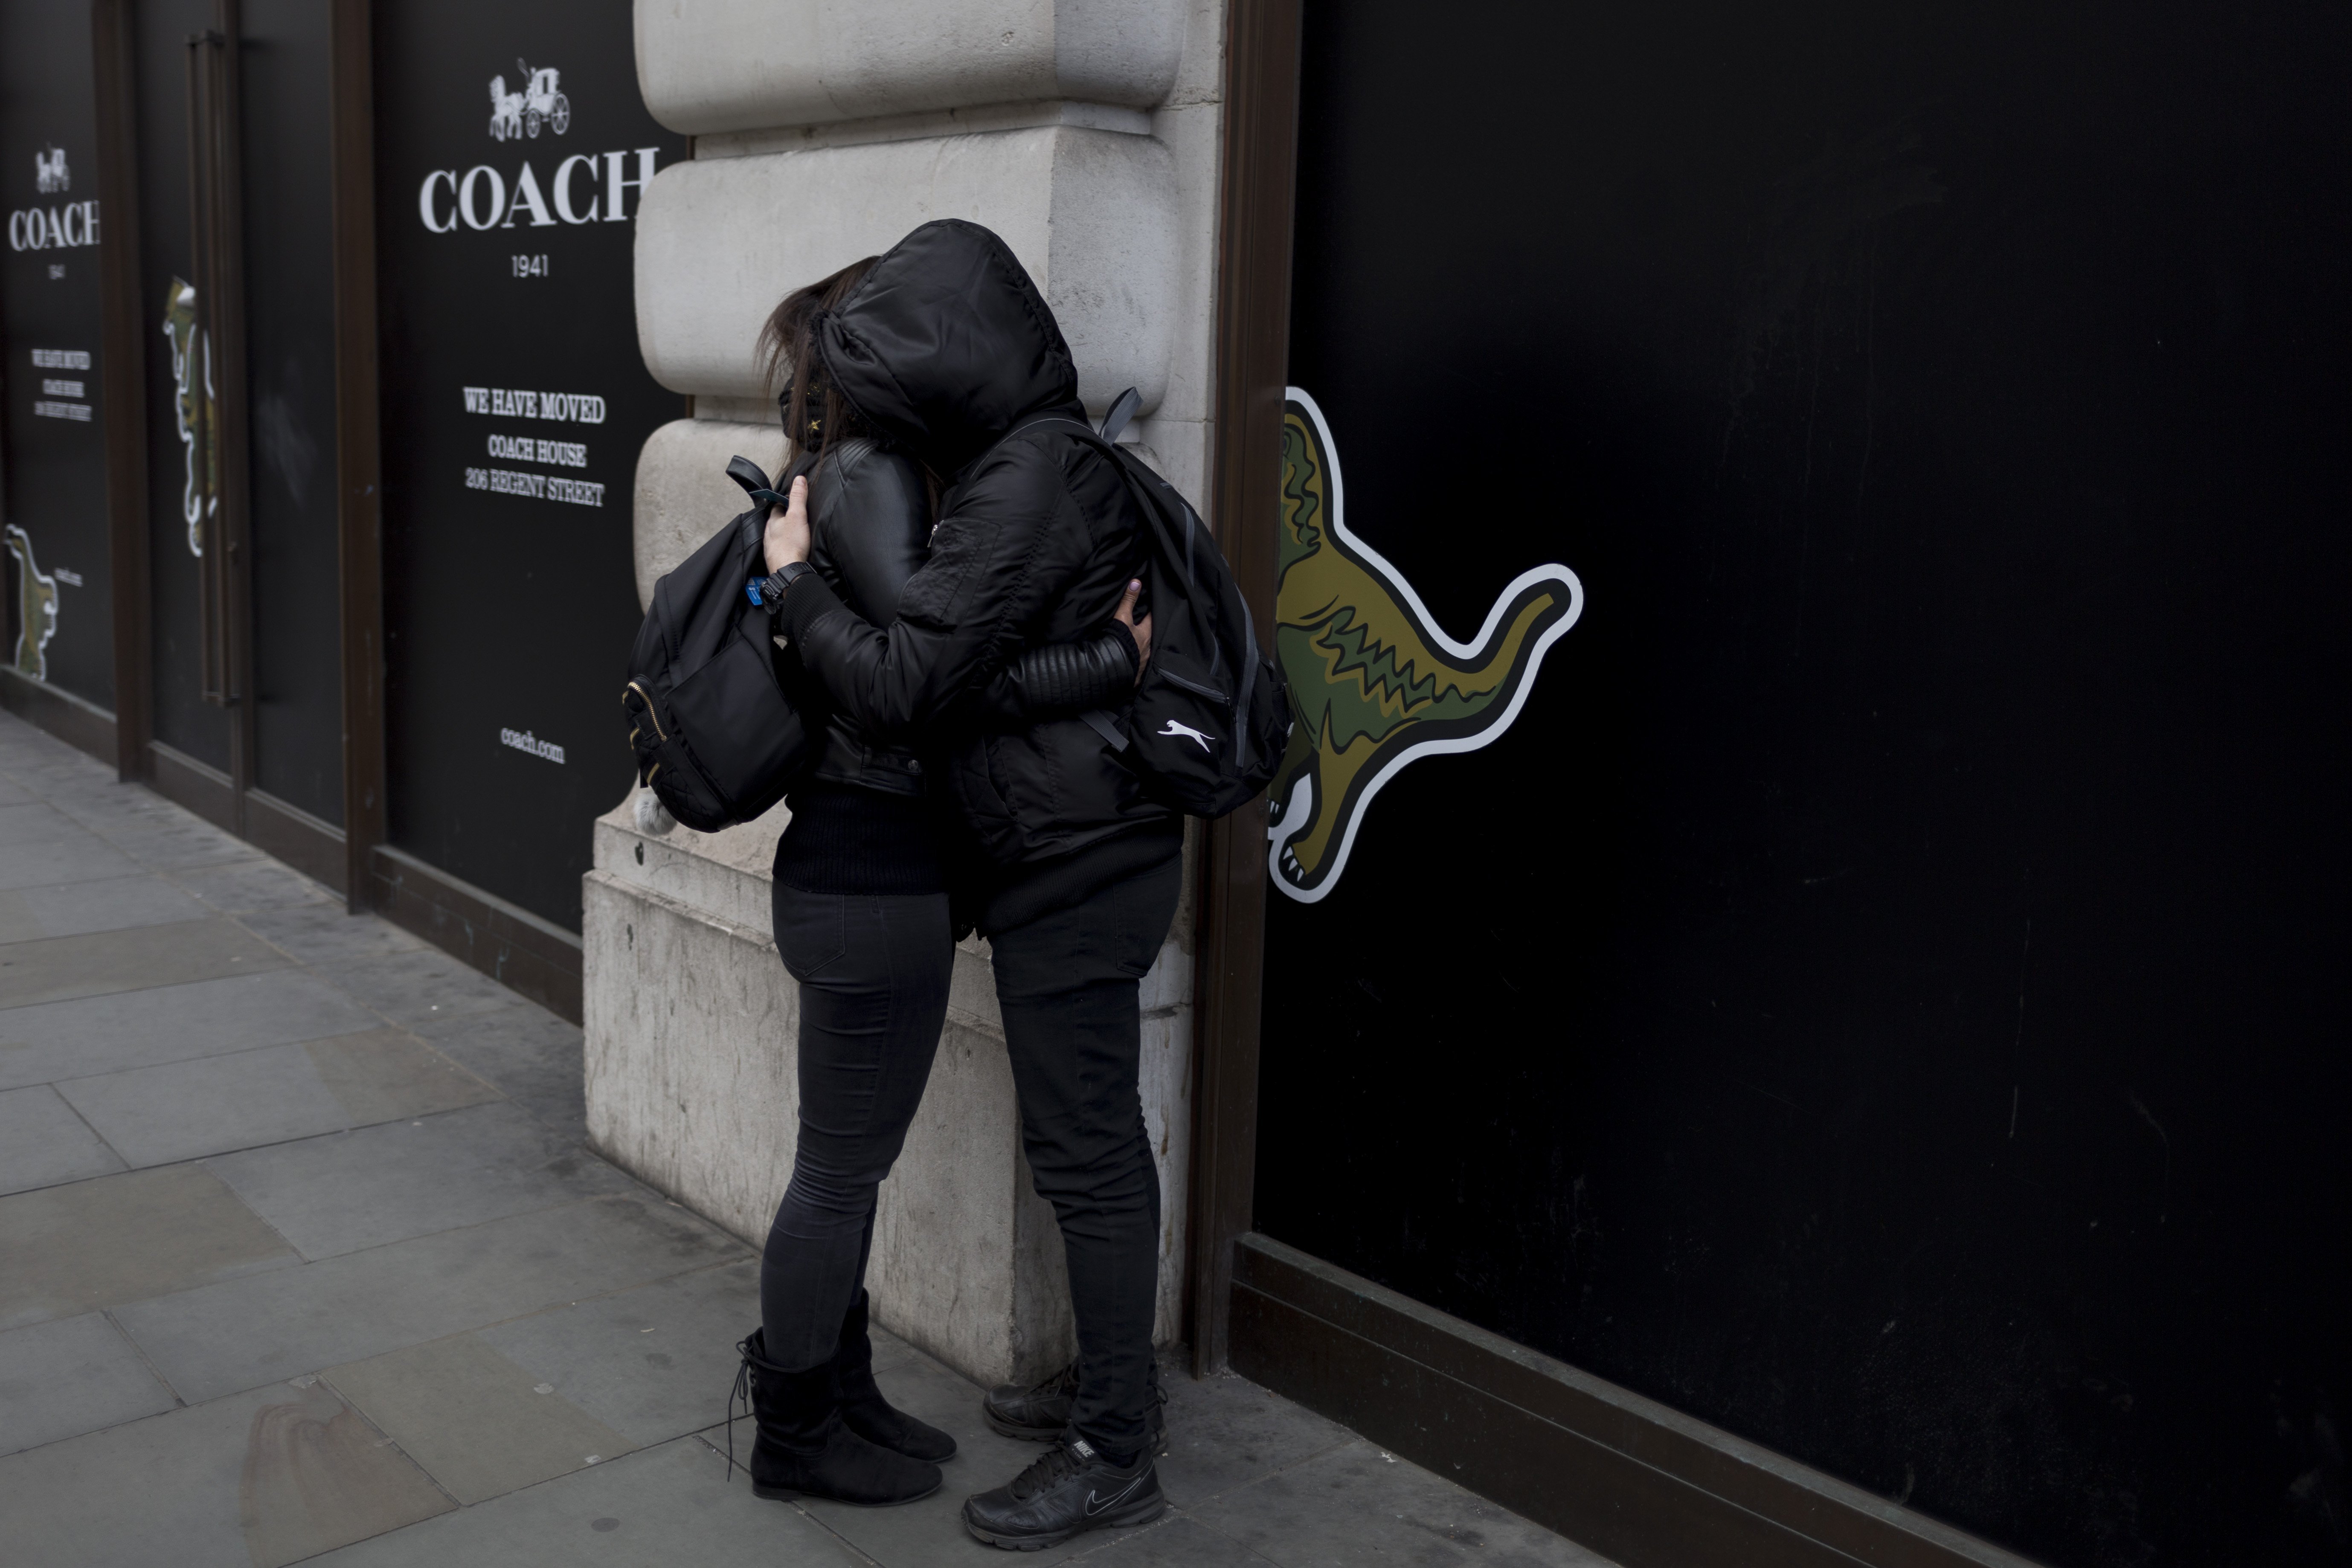 A couple wearing black hoodies with faces hidden, hug on Regent Street, on 21st March 2017|Photo: Getty Images